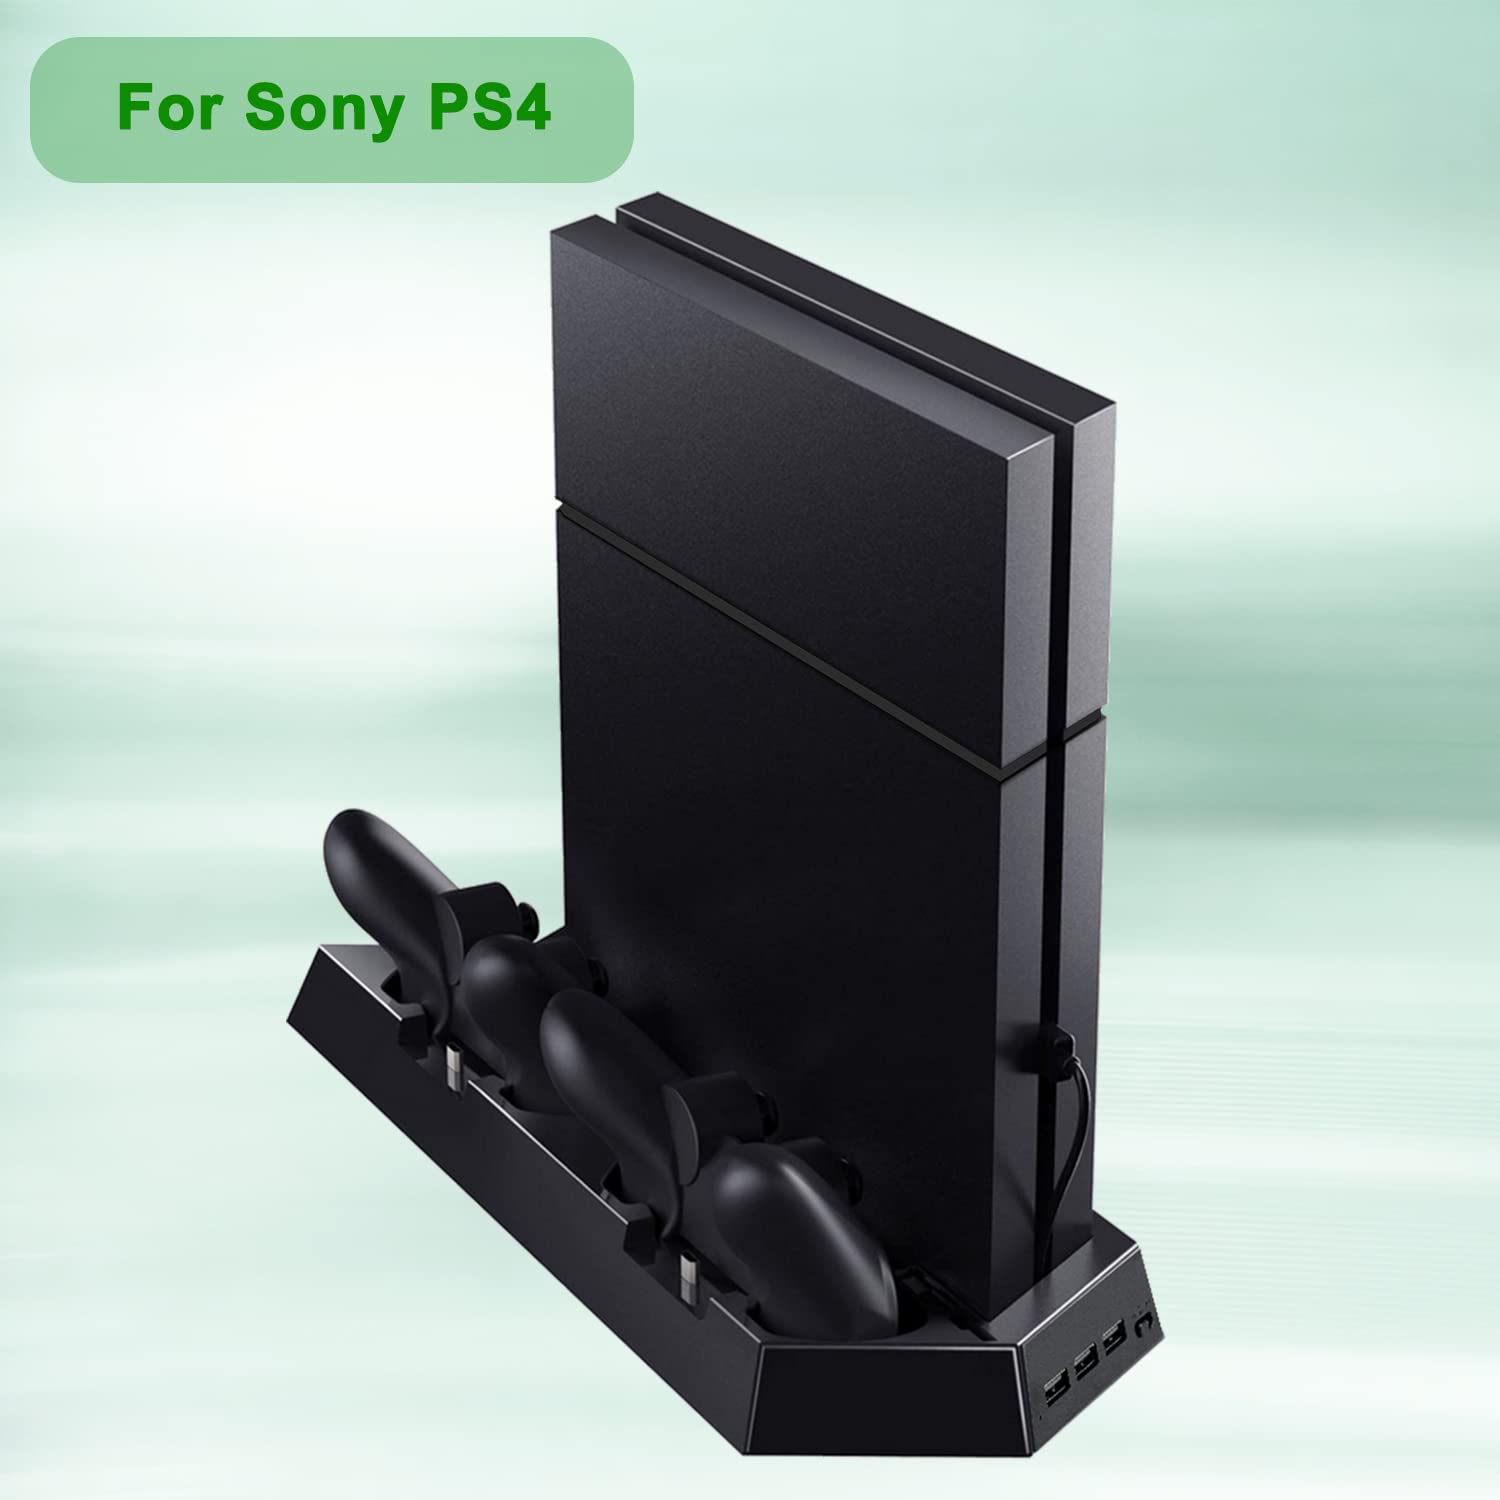 OSTENT Dual Motors Cooling Fan Radiator Charger Station USB Hub Vertical Stand for Sony PS4 / Slim Console